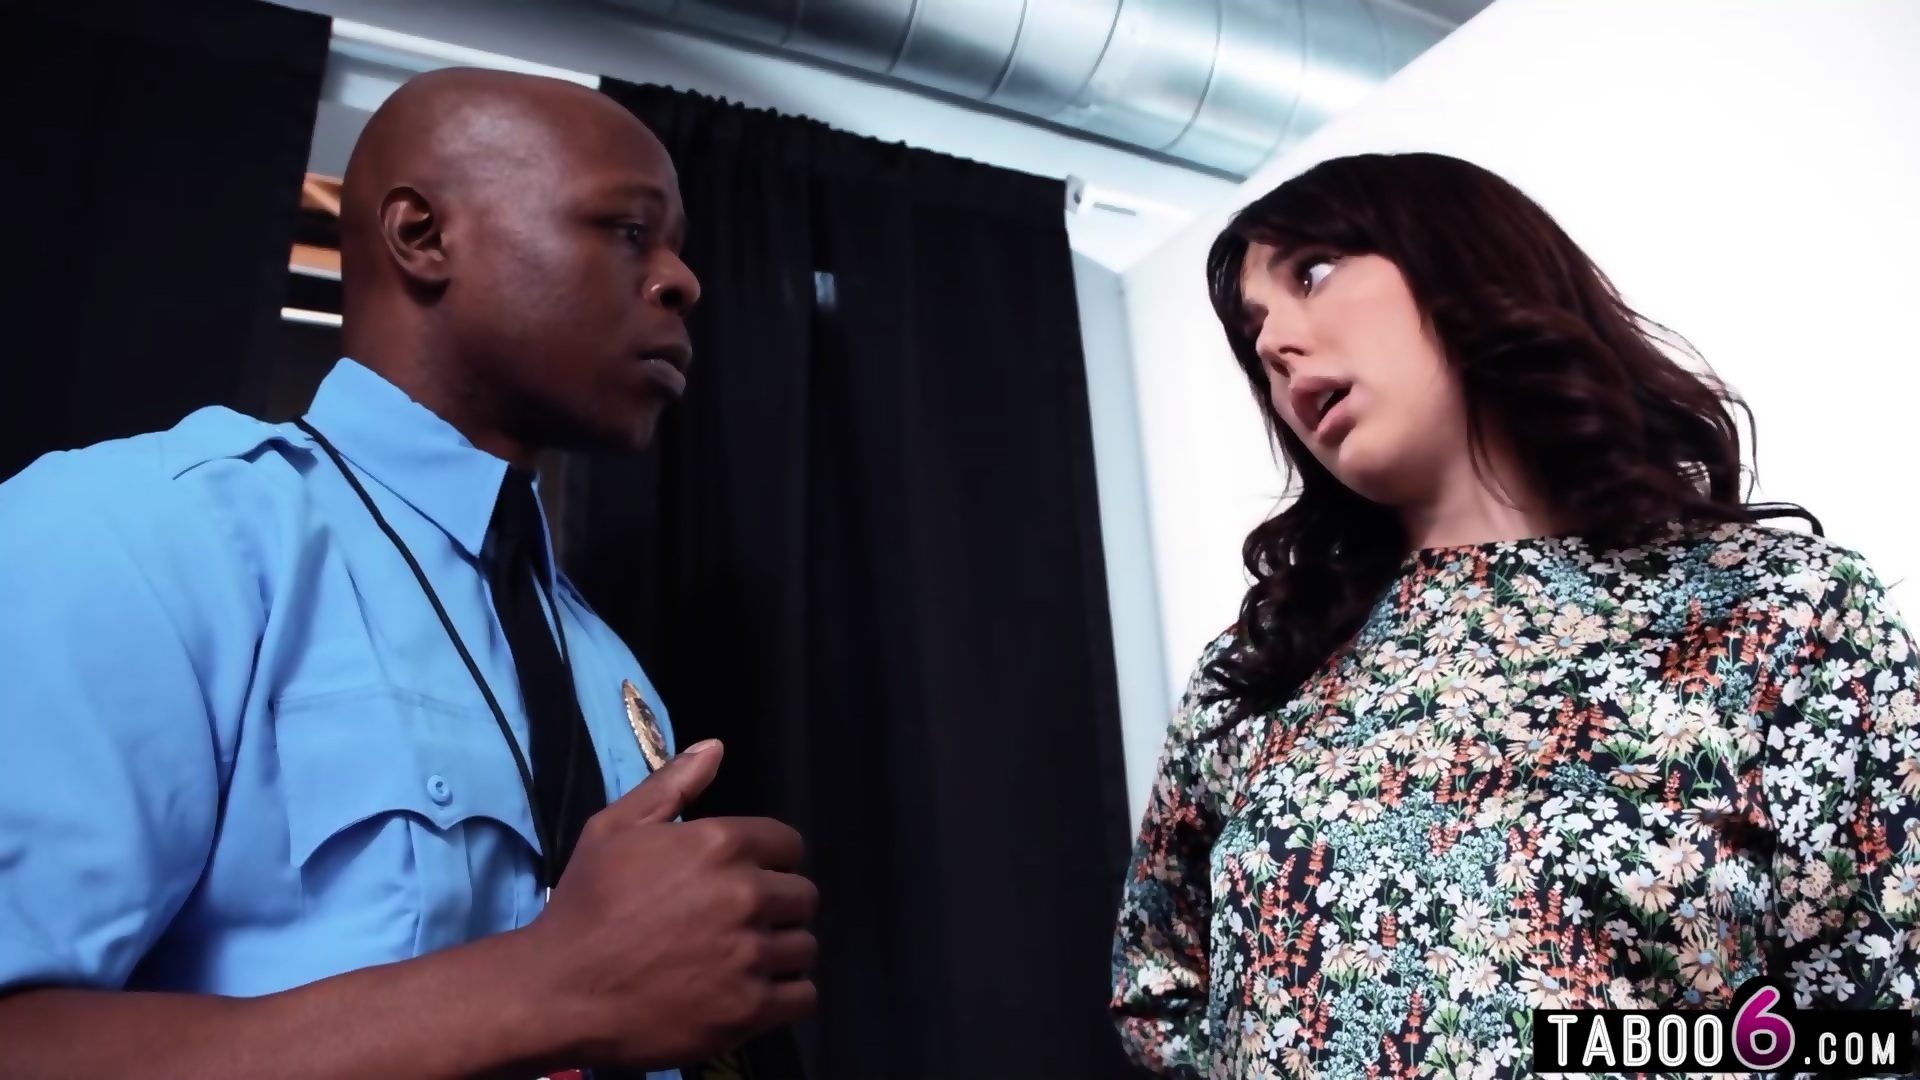 Airport Security Gangbang With Horny Passenger Whitney Wright - EPORNER